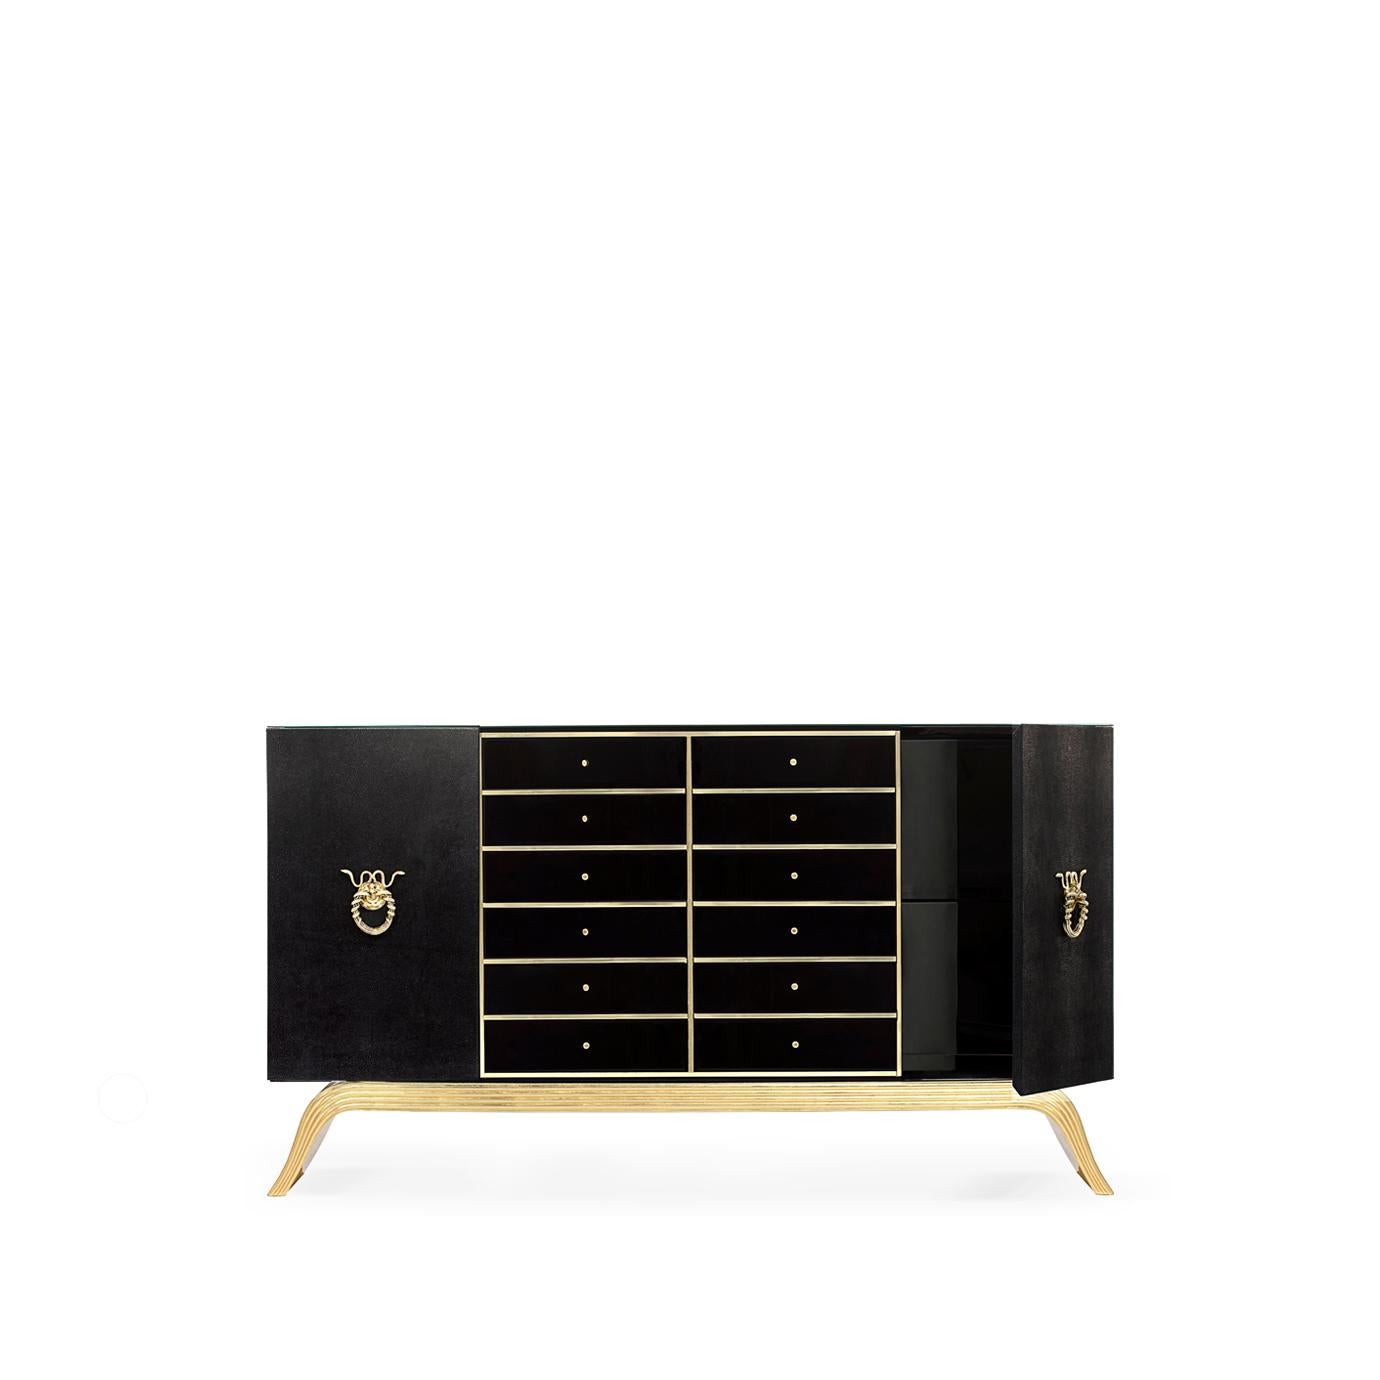 Indulge in a little naughtiness, especially if you have a place to store your sinful secrets. The Sinful cabinet is the perfect mix of daring and modern. Covered in a black stingray patterned leather upholstery, valuables can be contained in sleek